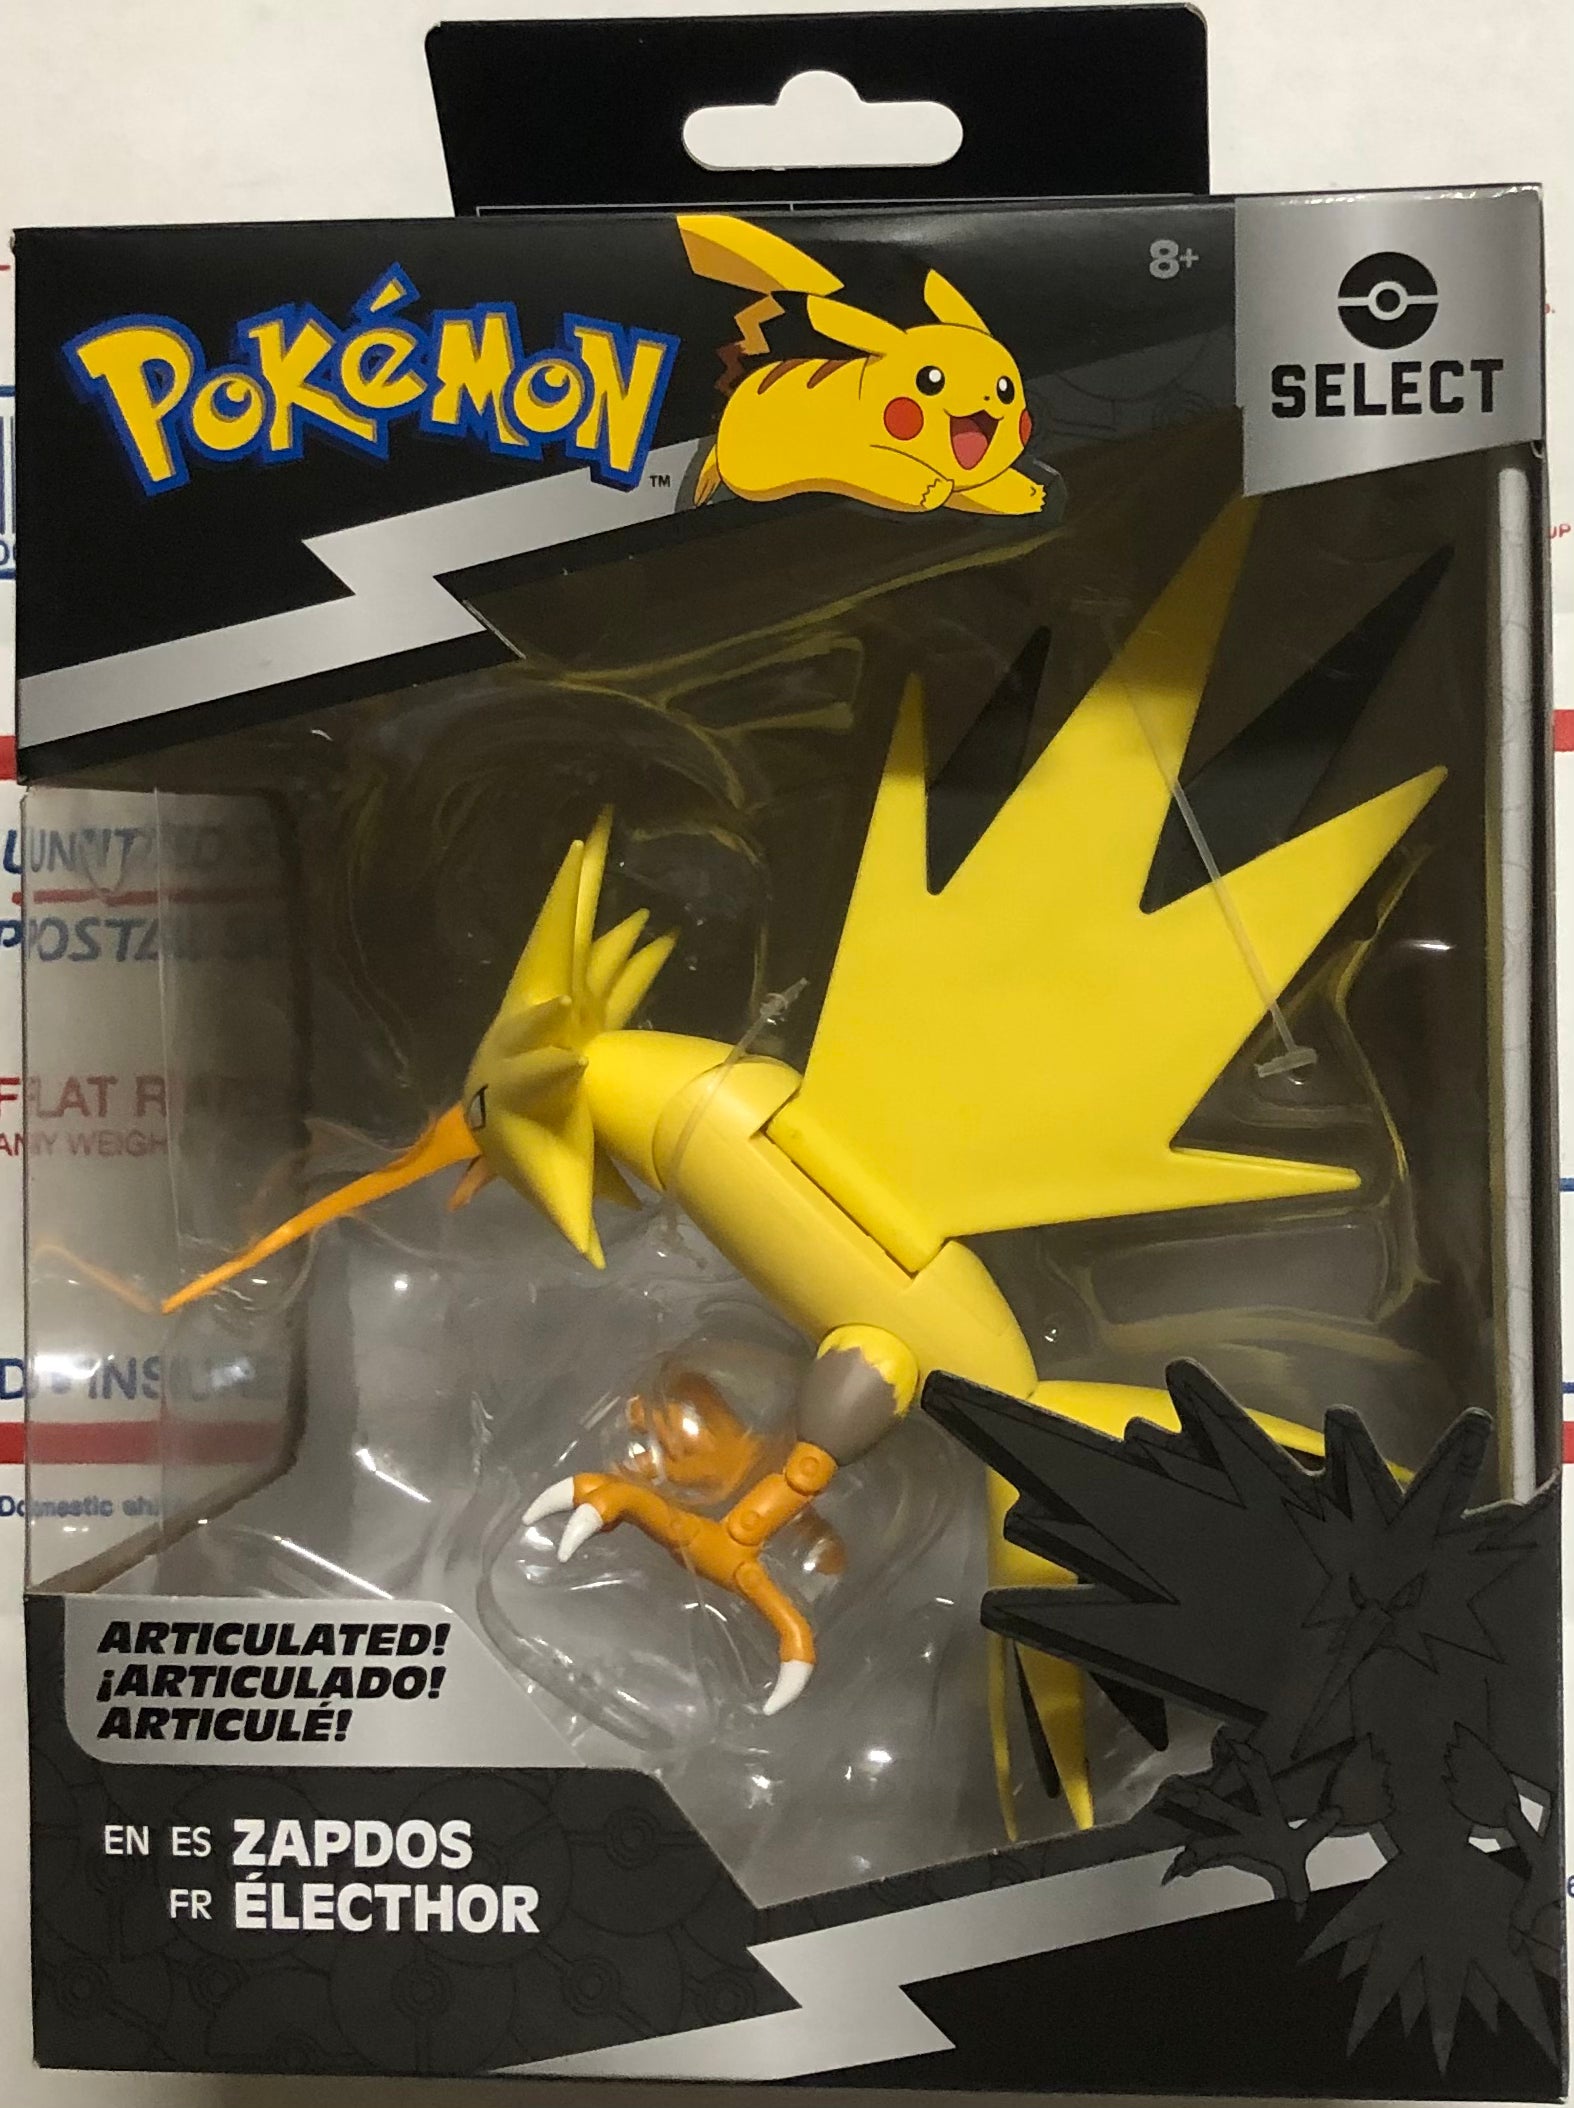 Pokémon Pokemon Articuno, Super-Articulated 6-Inch Figure - Collect Your  Favorite Figures - Toys for Kids Fans